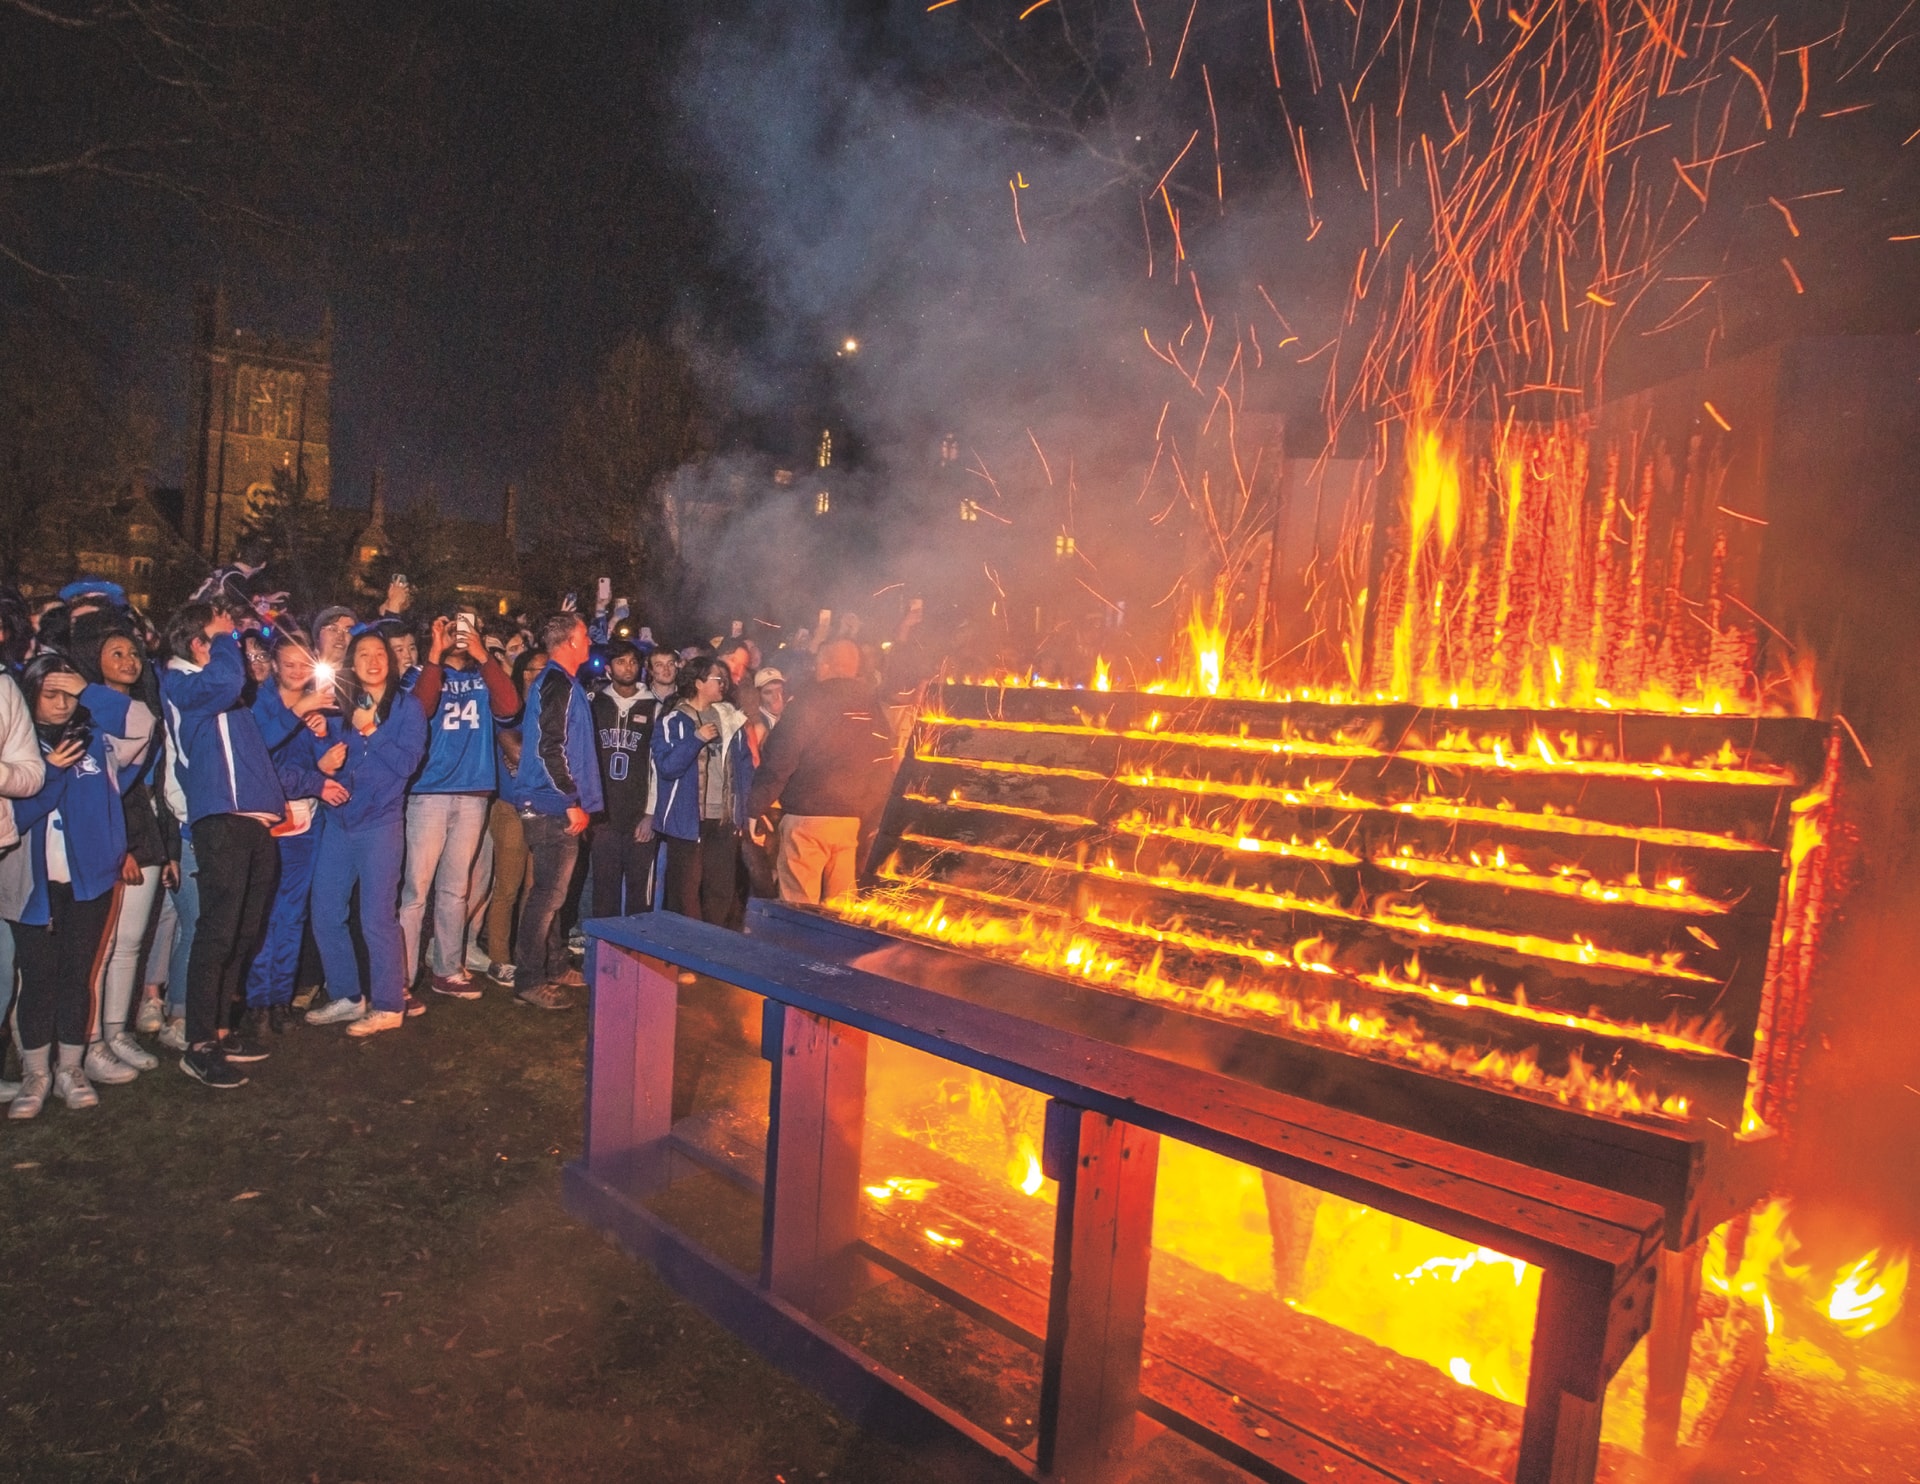 Students light up the benches after a win over UNC in February 2022. Photo by Chris Hildreth